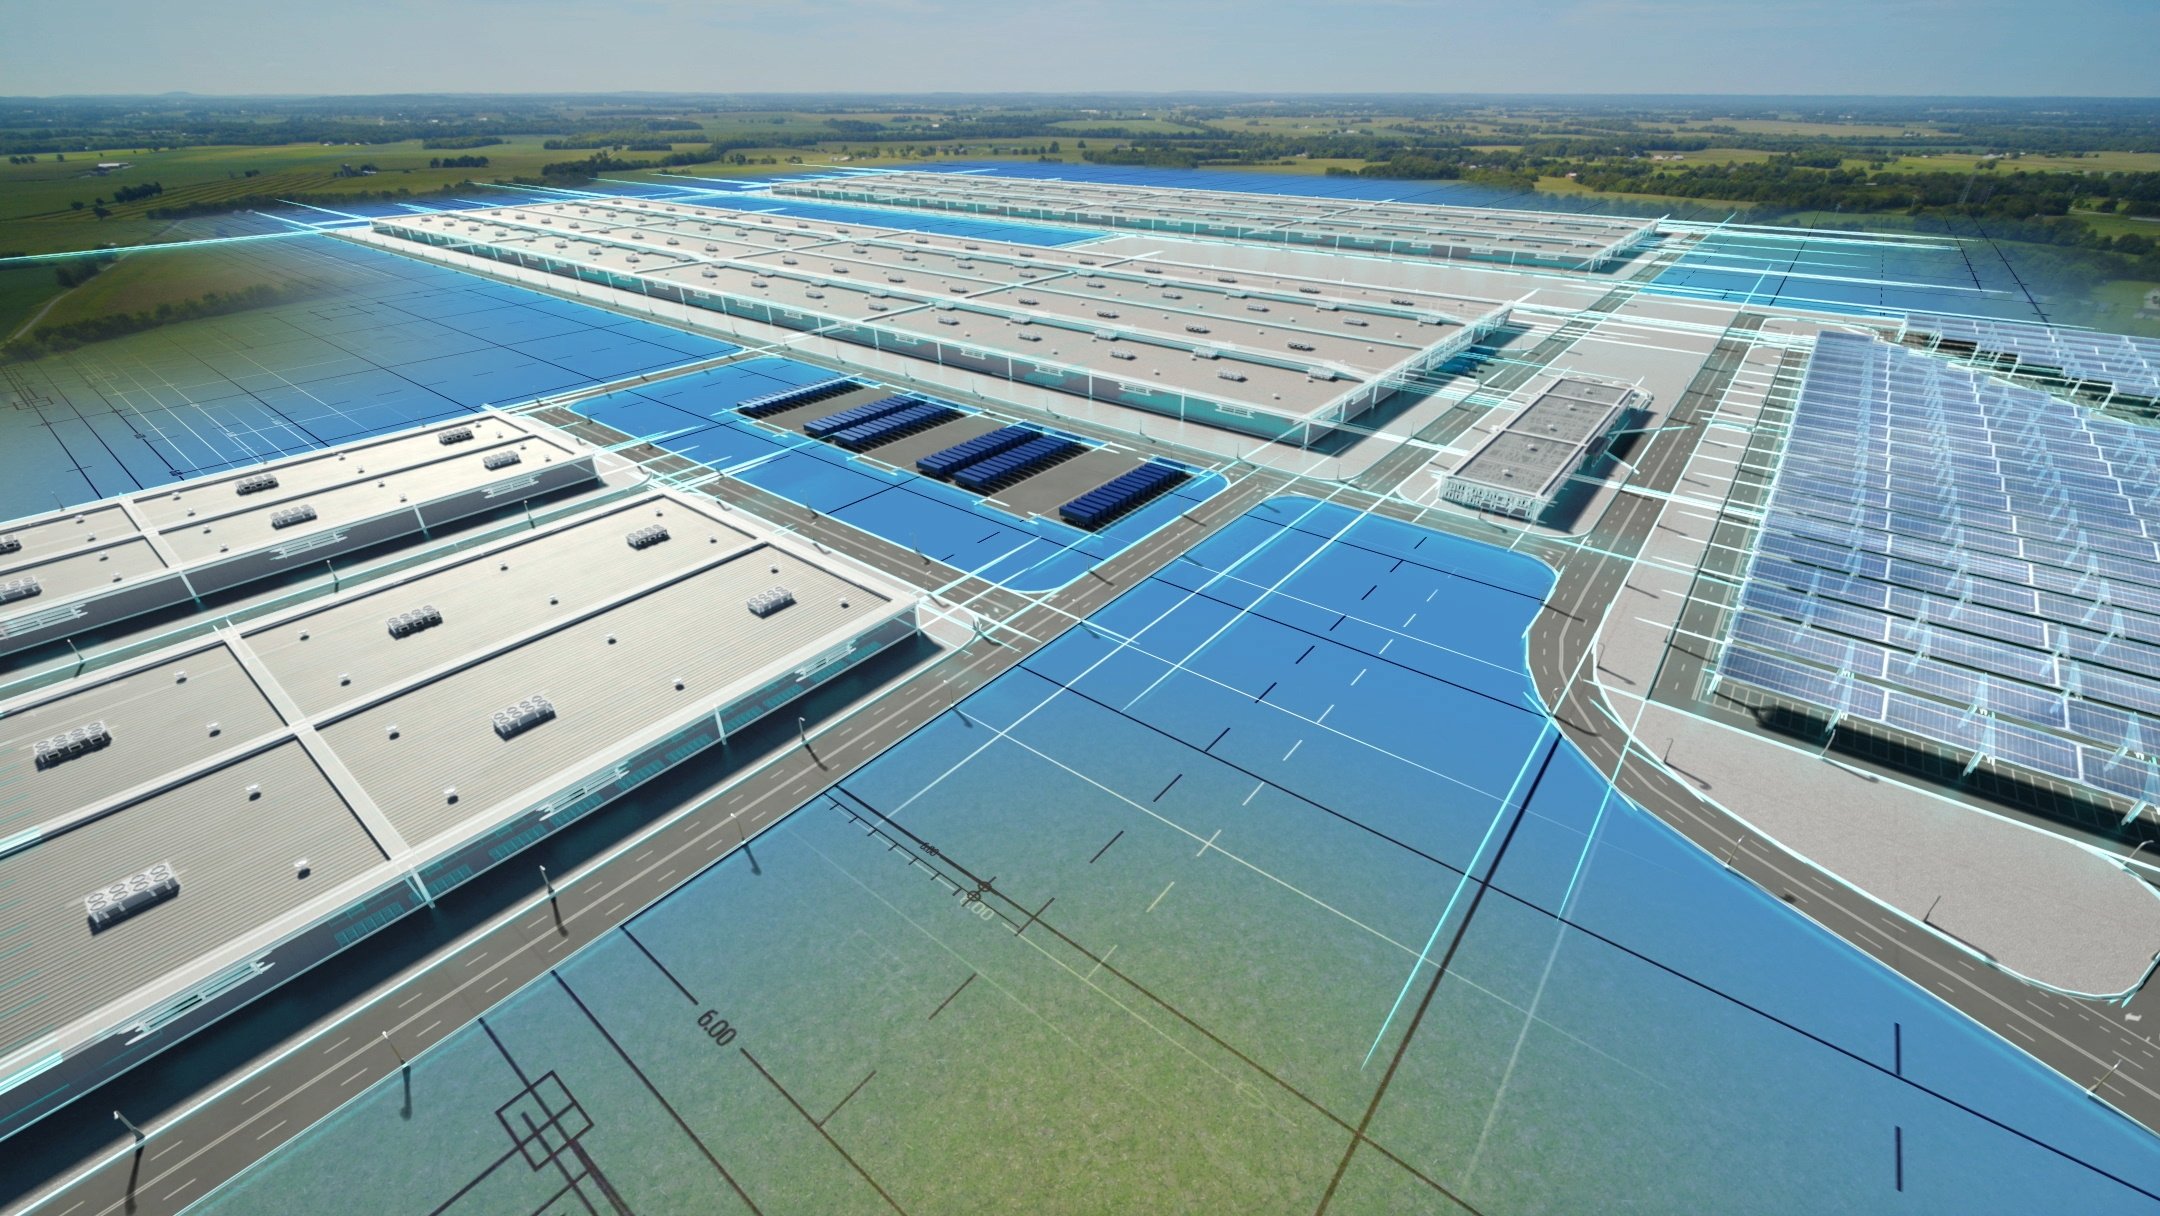 A battery manufacturing complex U.S automaker Ford Motor and its South Korean battery partner SK Innovation plan to build in Kentucky, opening in 2025, is seen in an artist